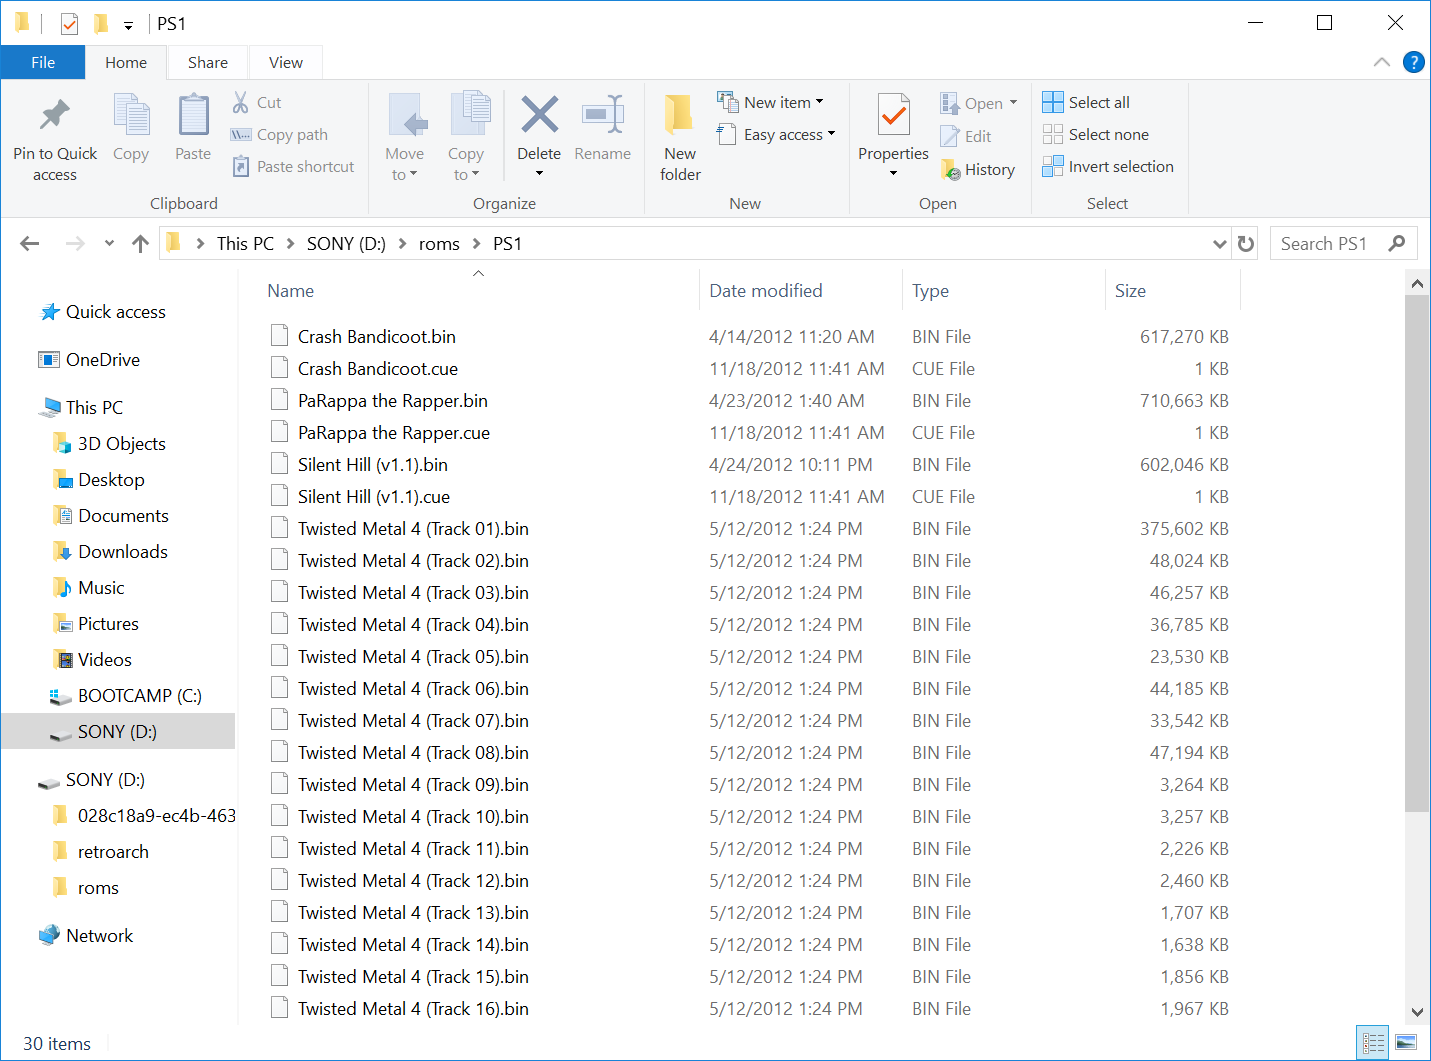 how to convert pbp file into cue and bin files to cd